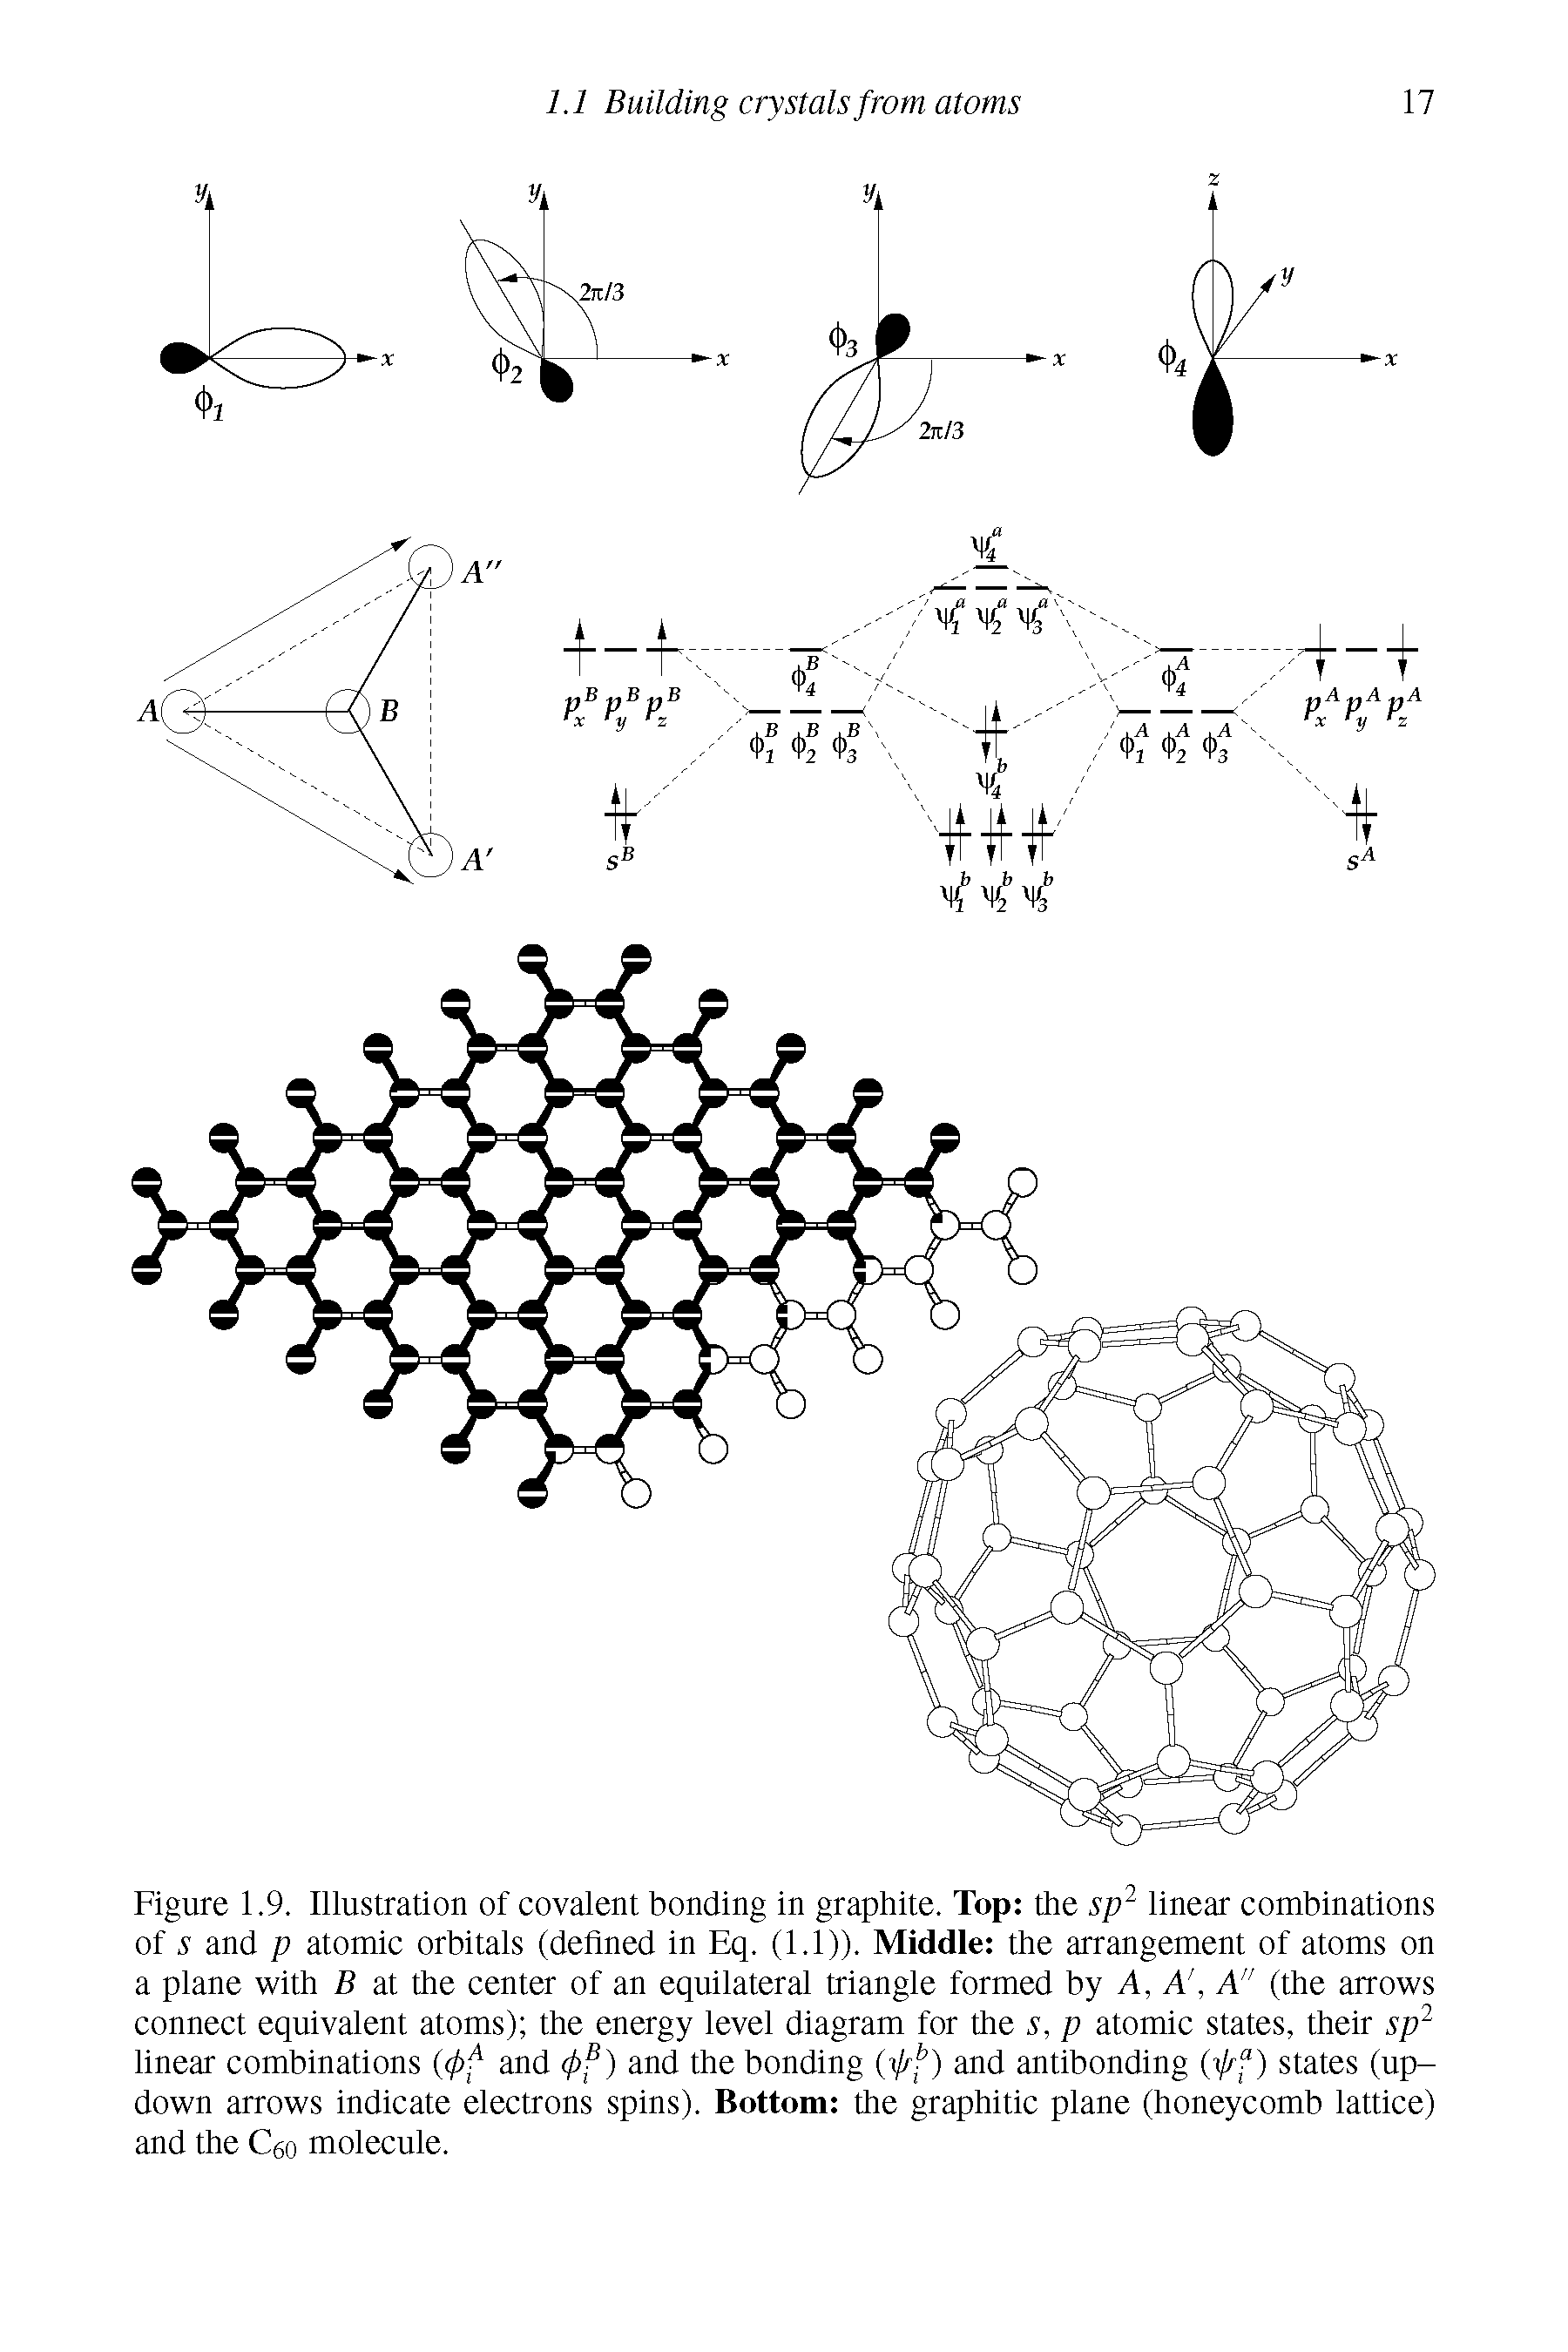 Figure 1.9. Illustration of covalent bonding in graphite. Top the sp linear combinations of. y and p atomic orbitals (detined in Eq. (1.1)). Middle the arrangement of atoms on a plane with B at the center of an equilateral triangle formed by A, A, A" (the arrows connect equivalent atoms) the energy level diagram for the. y, p atomic states, their sp linear combinations (ff and ff) and the bonding (ff) and antibonding ff ) states (up-down arrows indicate electrons spins). Bottom the graphitic plane (honeycomb lattice) and the Ceo molecule.